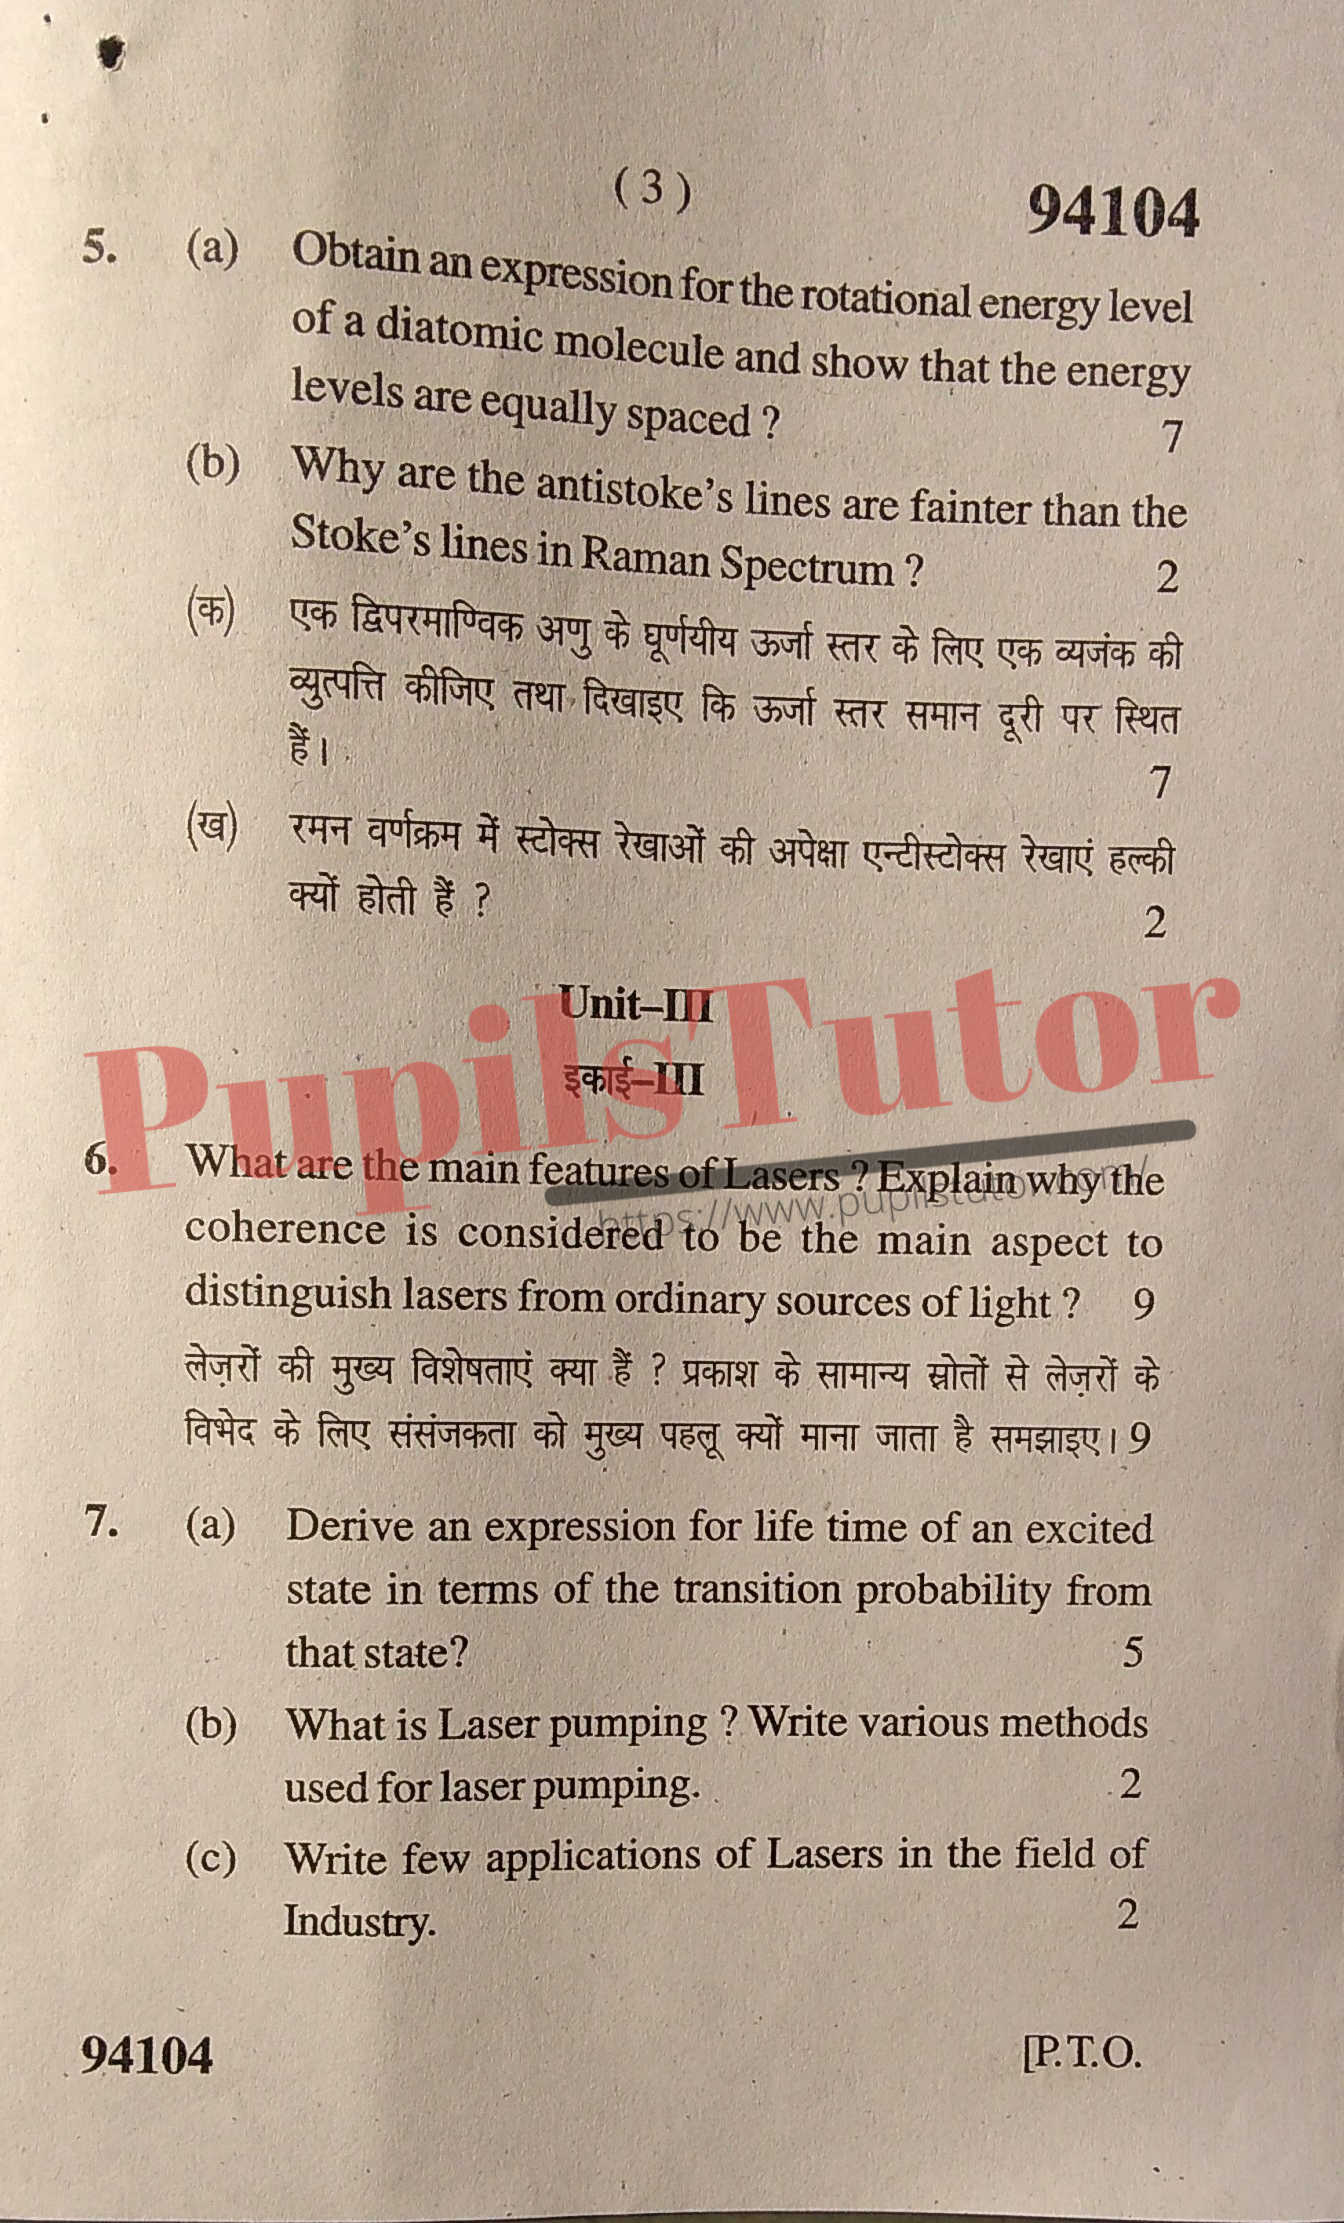 Free Download PDF Of M.D. University B.Sc. [Physics] Sixth Semester Latest Question Paper For Atomic Molecular And Laser Physics Subject (Page 3) - https://www.pupilstutor.com